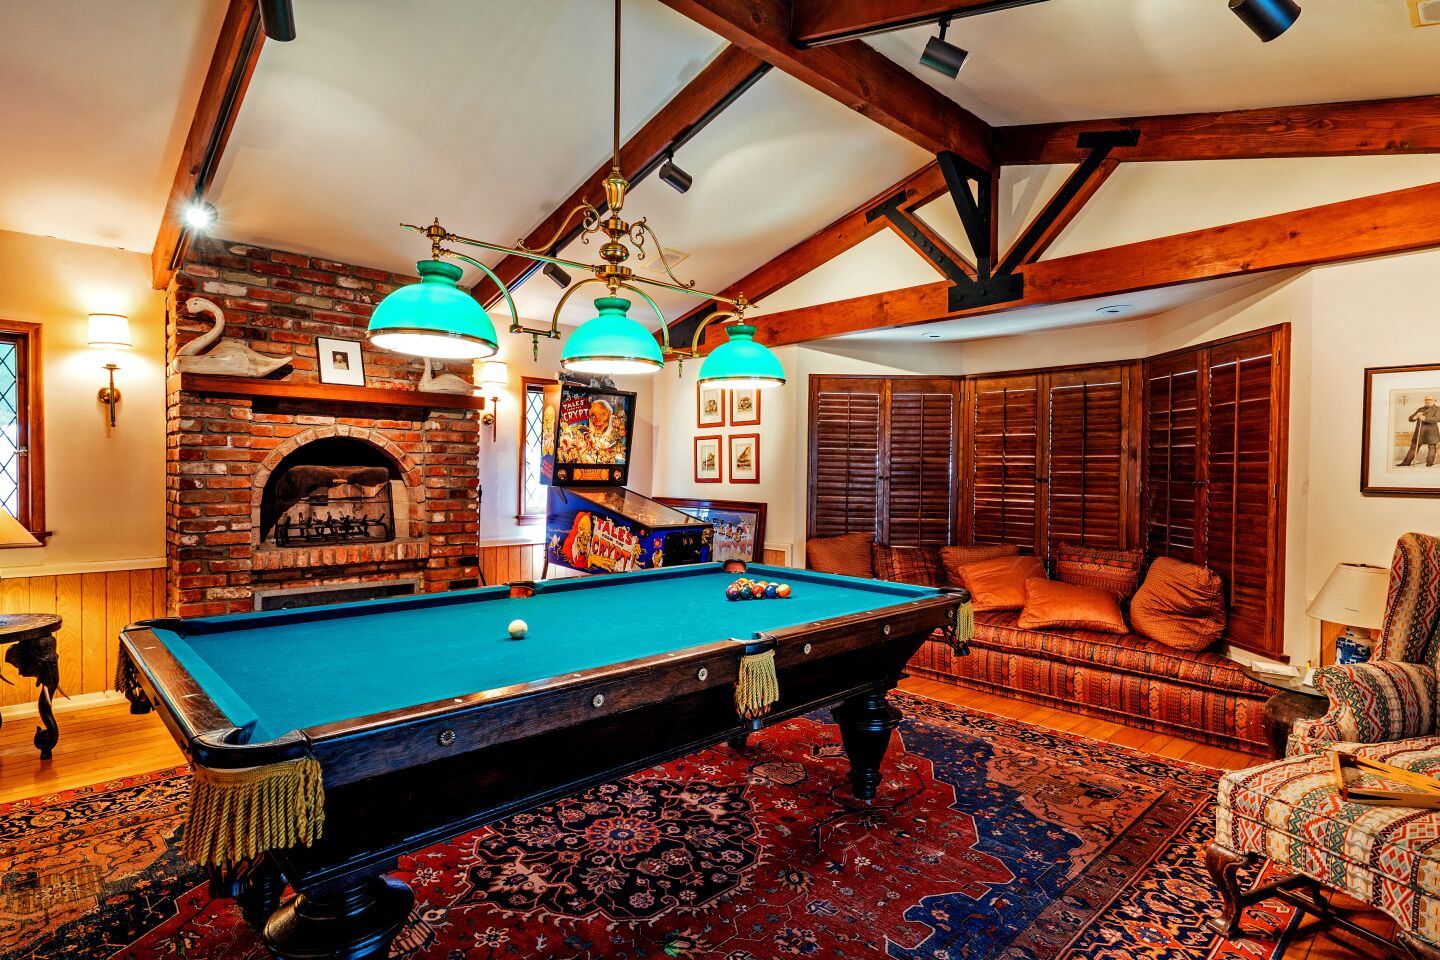 The home has two brick fireplaces and a bar in the den.